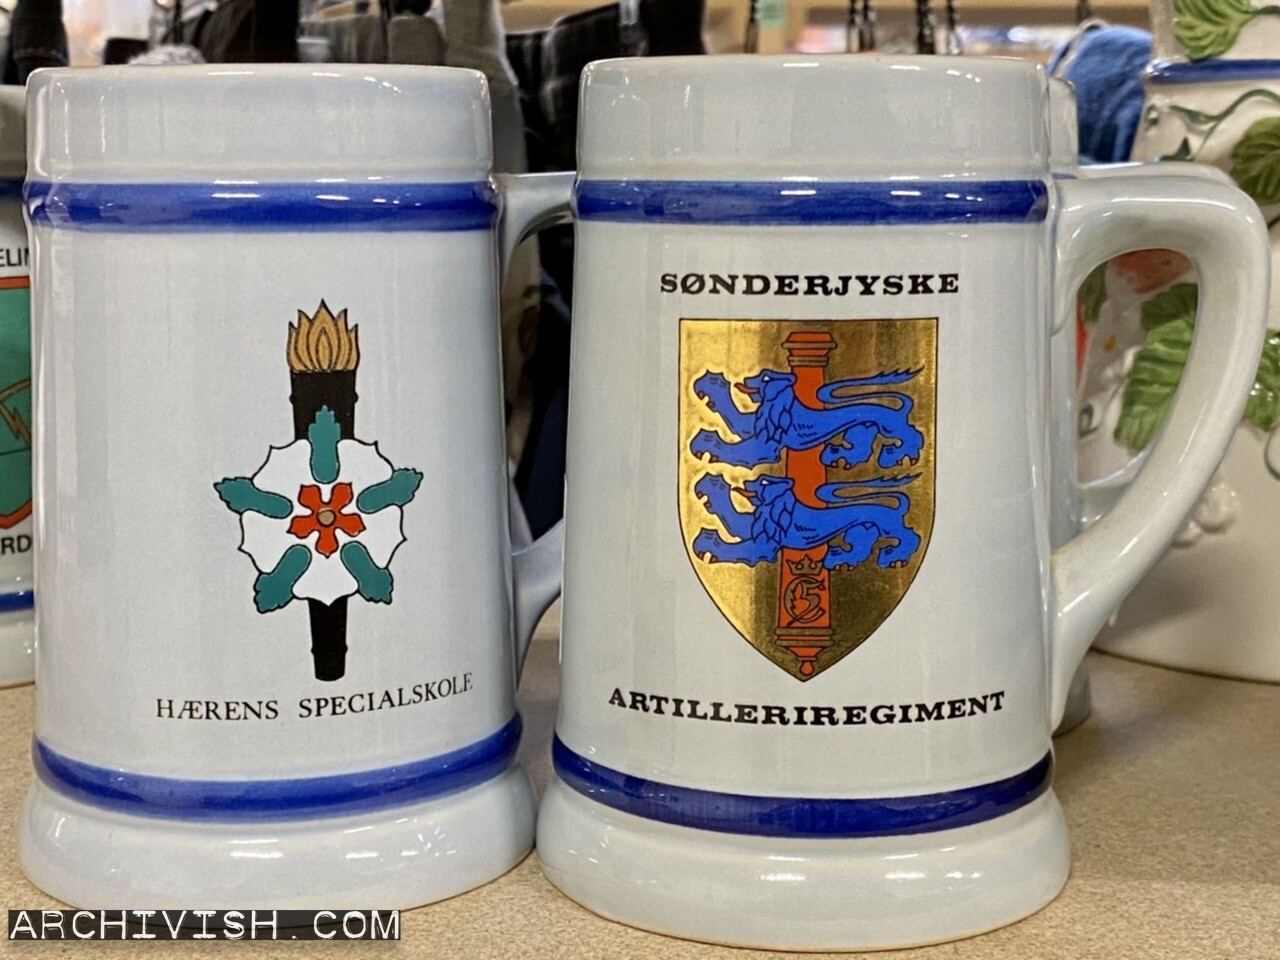 Søholm mugs with military insignia